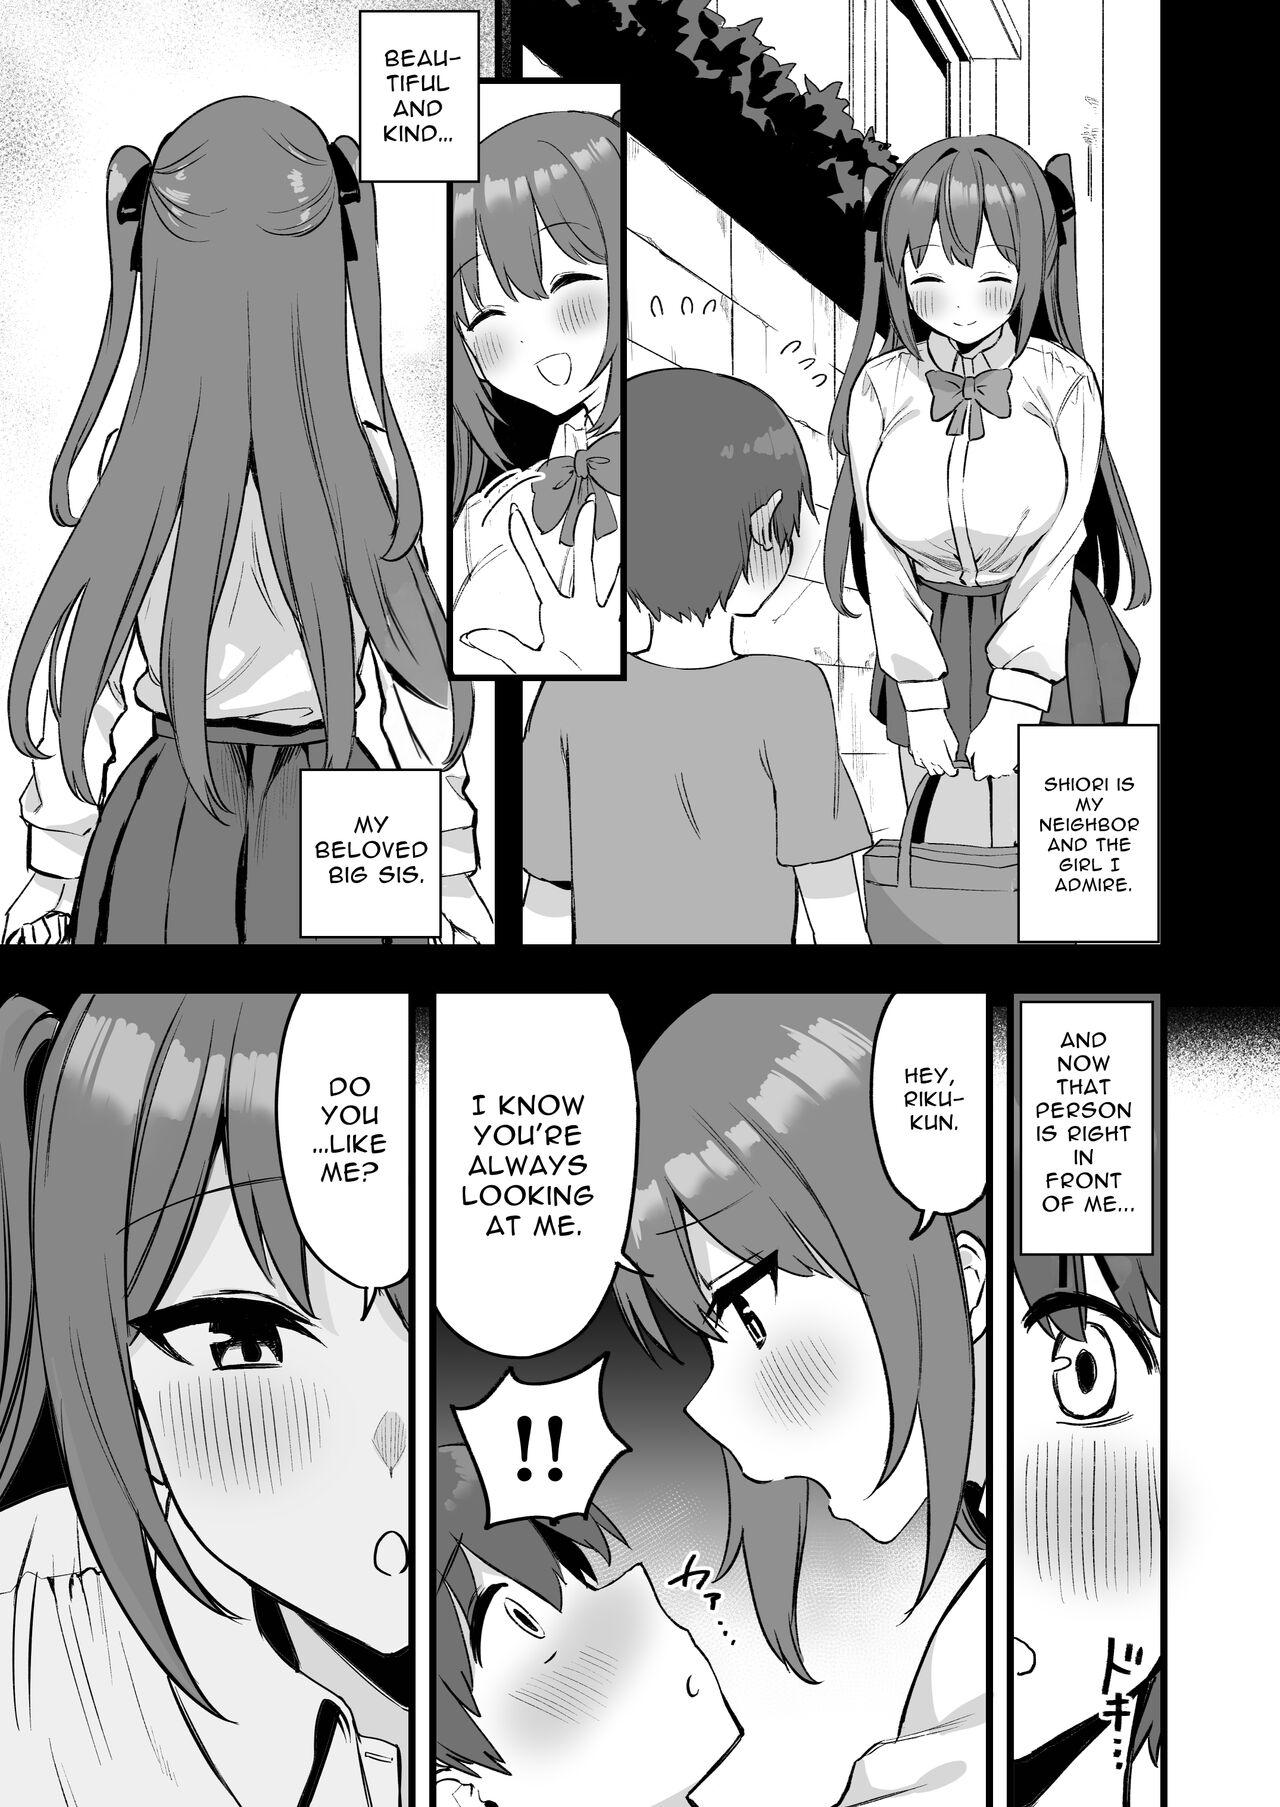 Gay Shorthair Onee-chan wa Succubus!? | The Older Girl In My Neighborhood Is A Succubus!? - Original Deflowered - Page 4